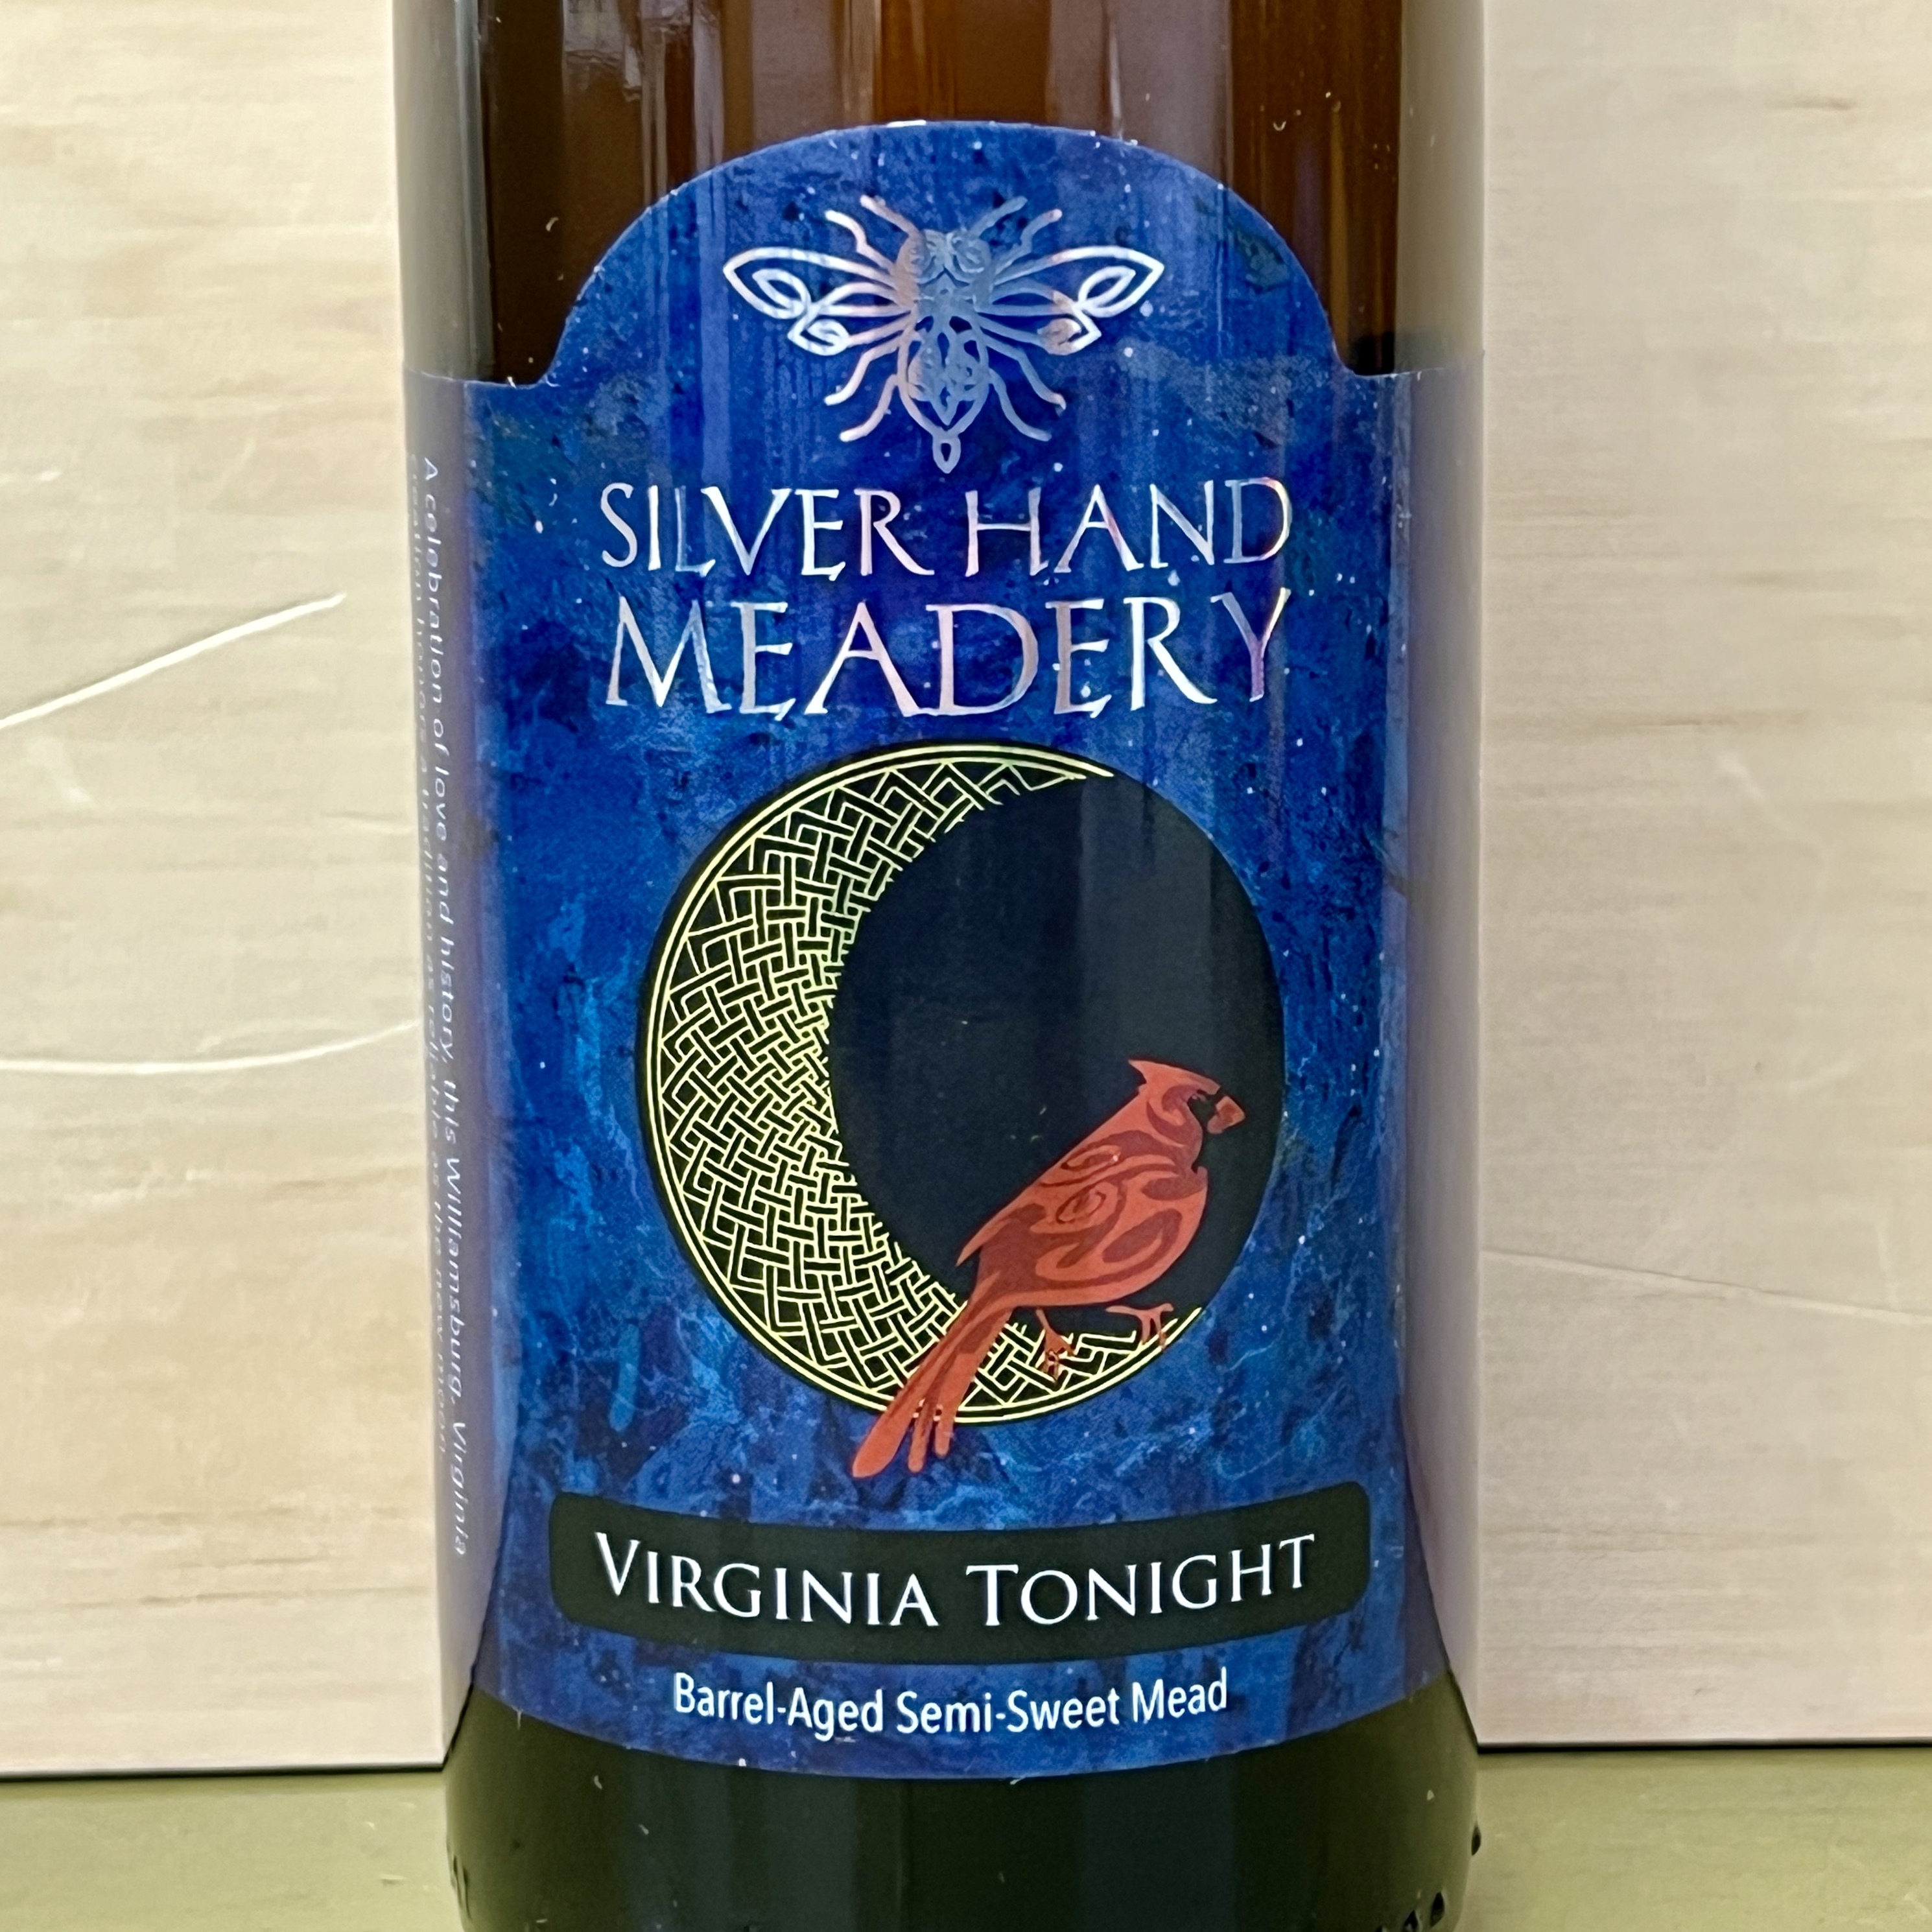 Silver Hand Meadery Virginia Tonight mead 500ml - Click Image to Close